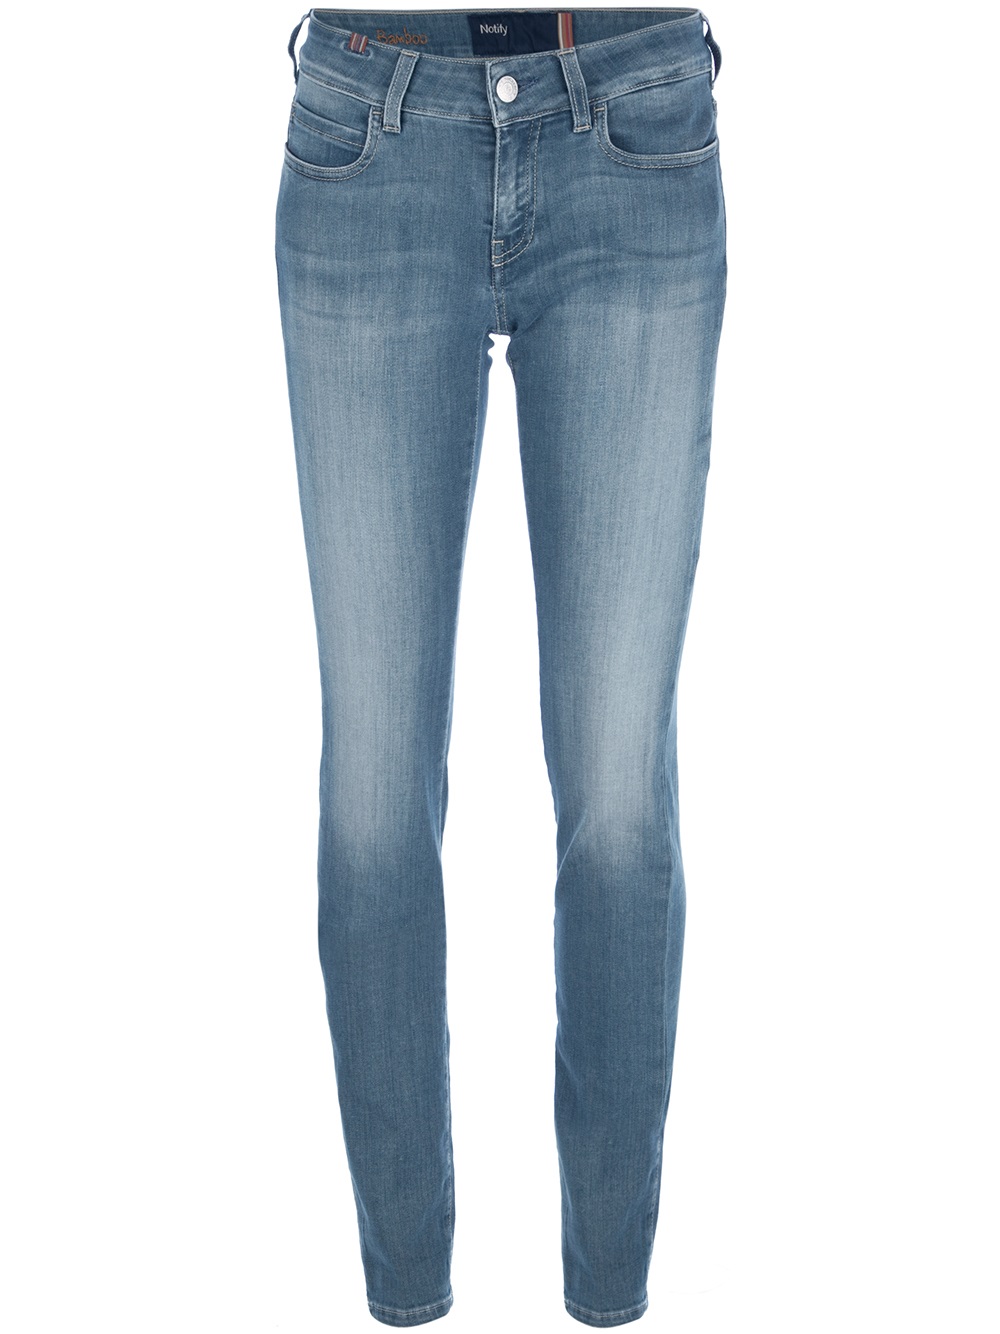 Lyst - Notify Bamboo Skinny Jeans in Blue